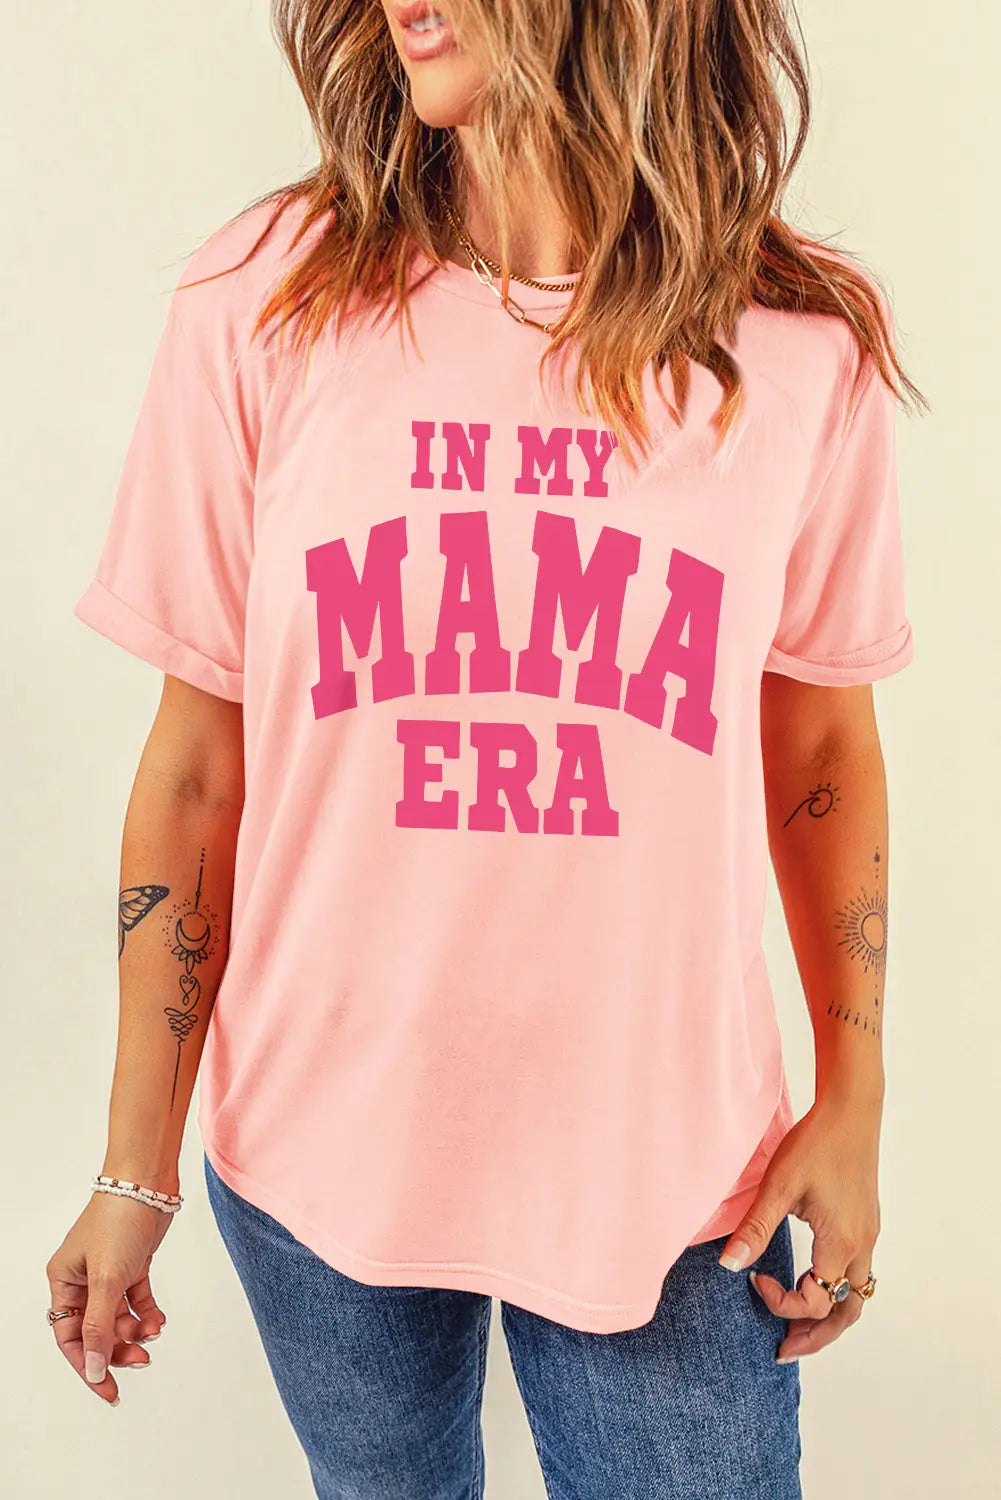 Pink in my mama era crew neck graphic t shirt - s / 62% polyester + 32% cotton + 6% elastane - t-shirts